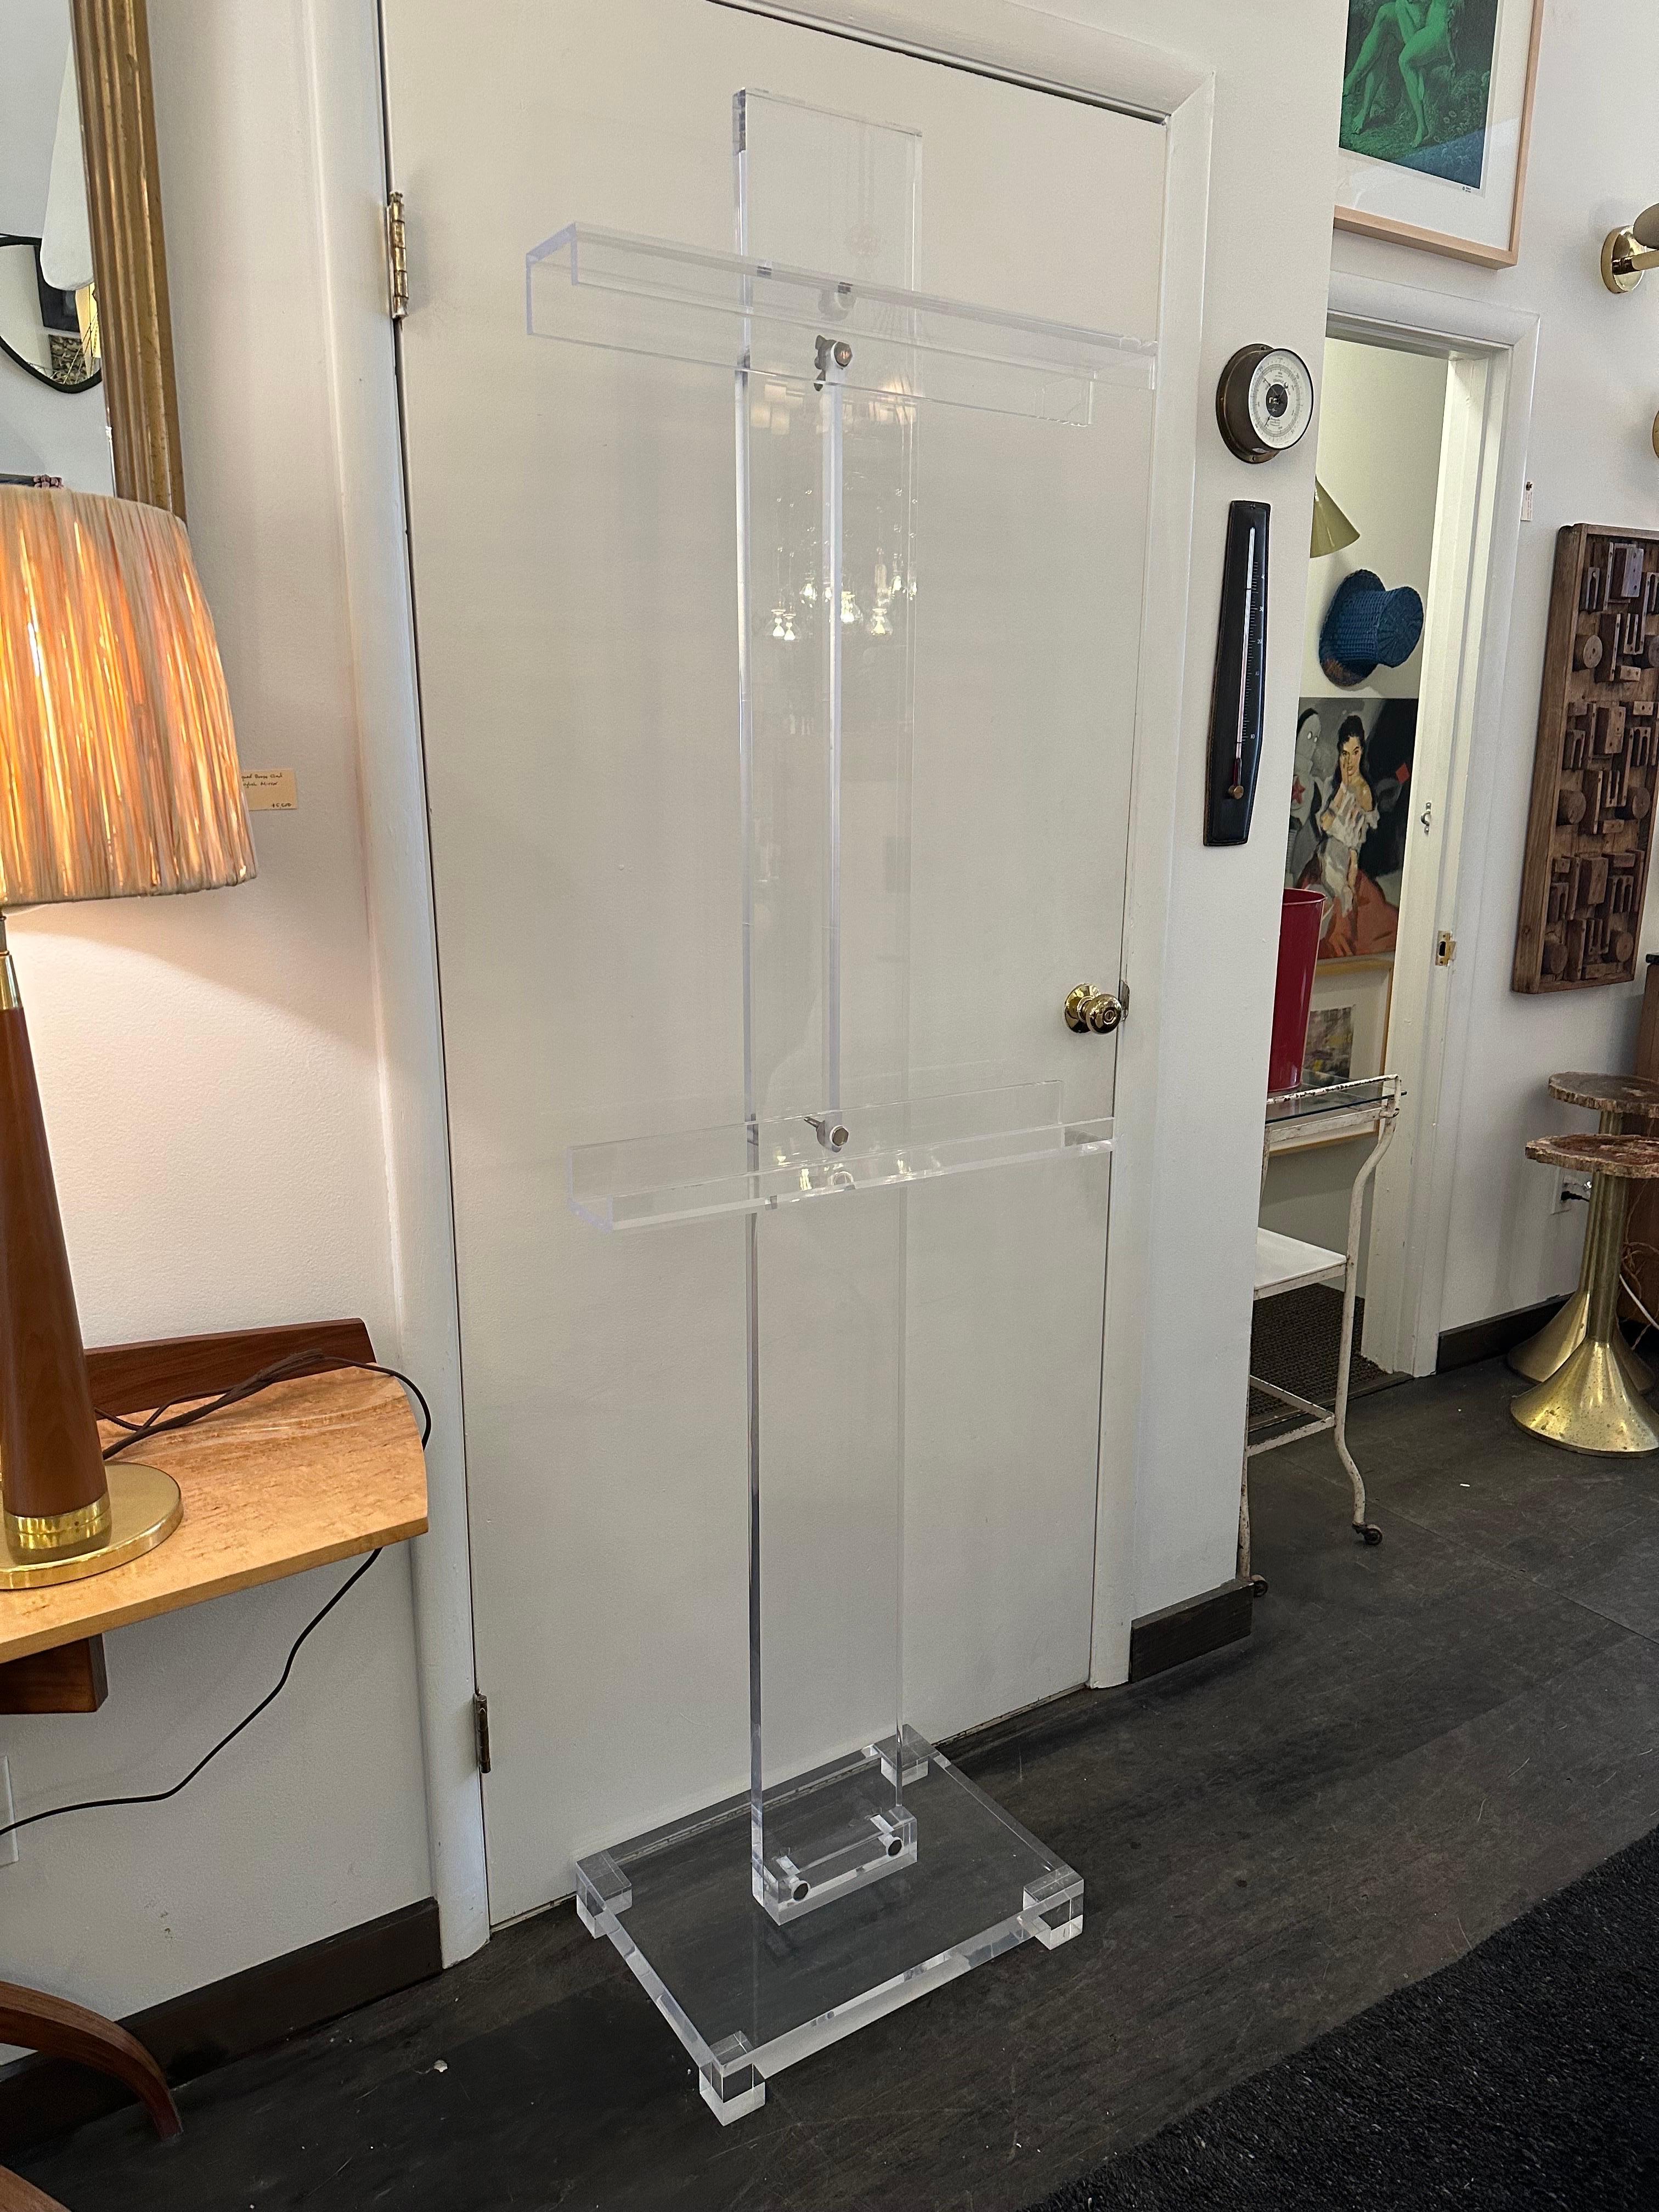 This is a fantastic Fully adjustable six foot tall art easel, perfect for displaying your favorite art which can easily float in a room. NOTE: depth of opening for art display is 3 inches and 30.5 inches tall. This would be the maximum height and